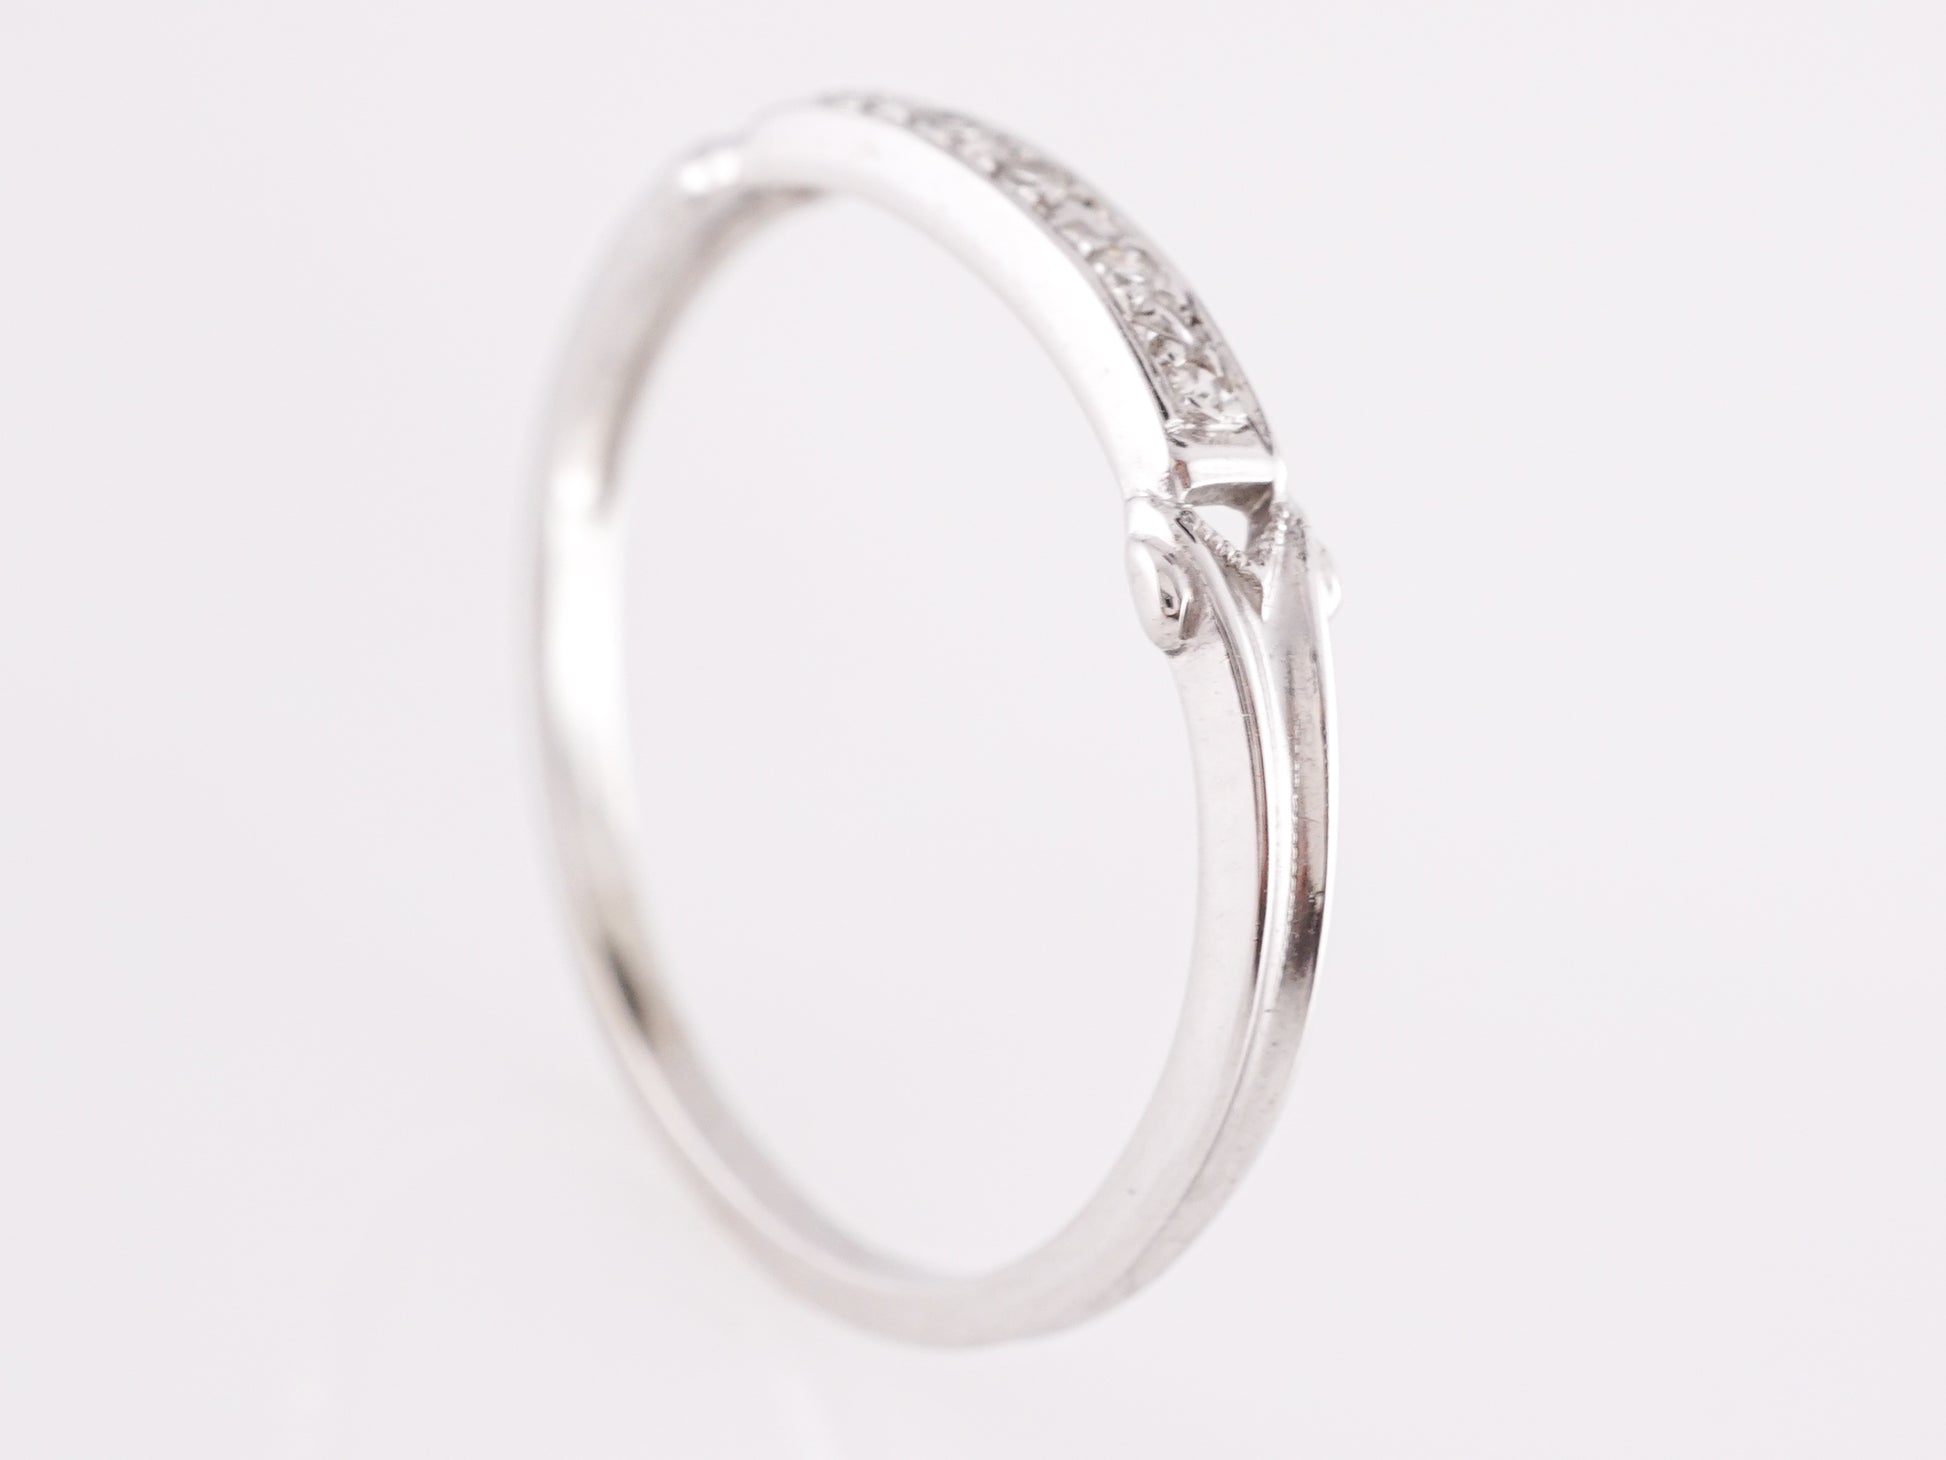 .05 Vintage Deco Diamond Wedding Band in 10k White GoldComposition: Platinum Ring Size: 5.5 Total Diamond Weight: .05ct Total Gram Weight: .70 g Inscription: 10k
      